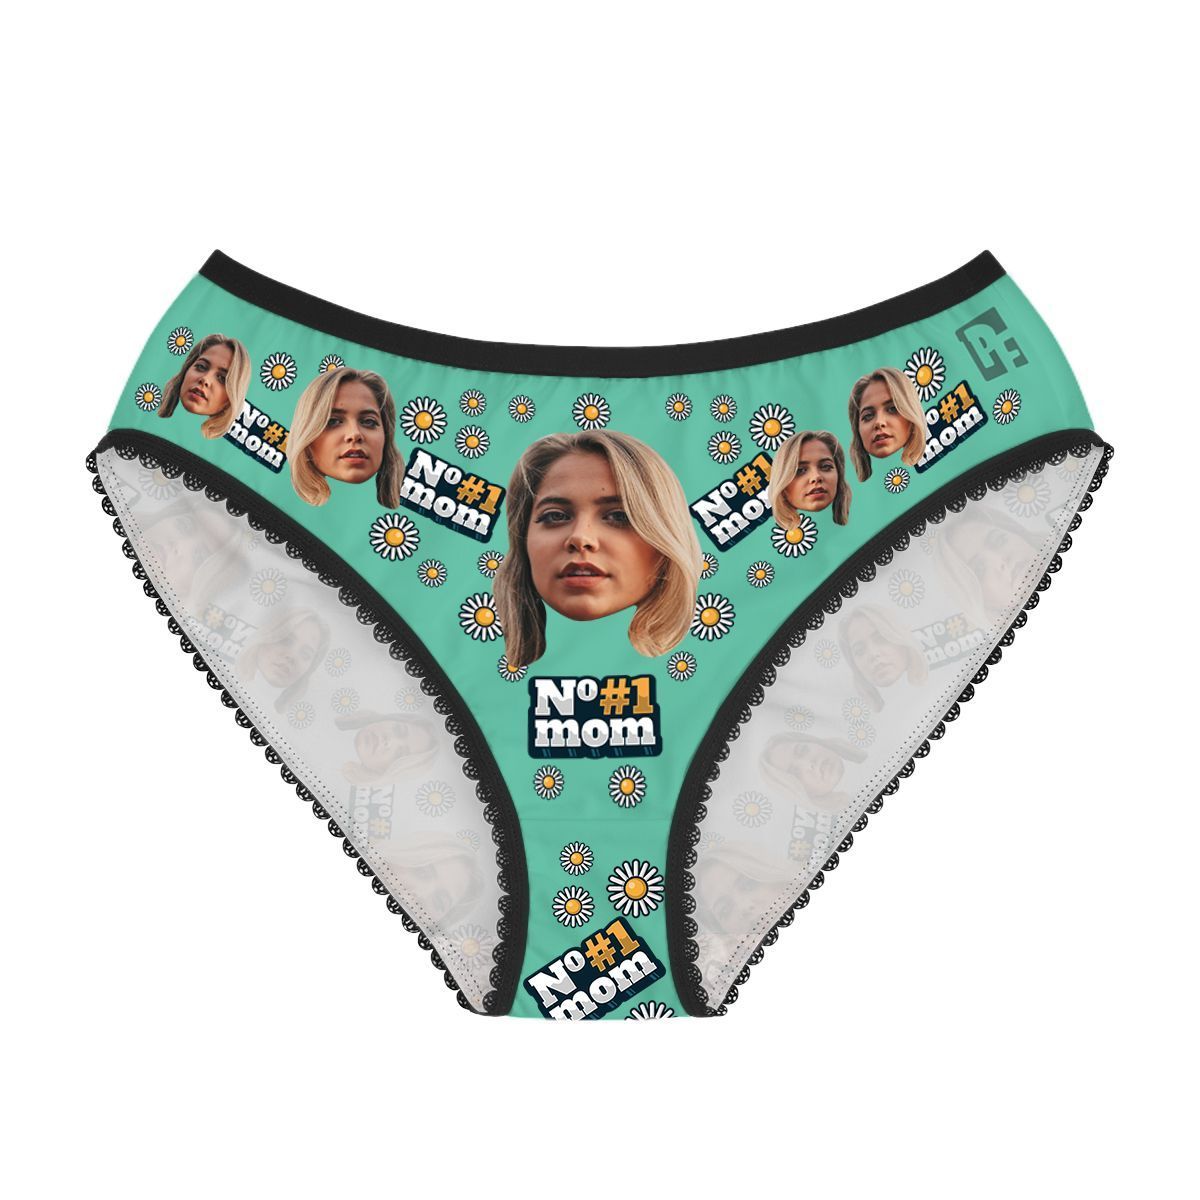 Mint #1 Mom women's underwear briefs personalized with photo printed on them